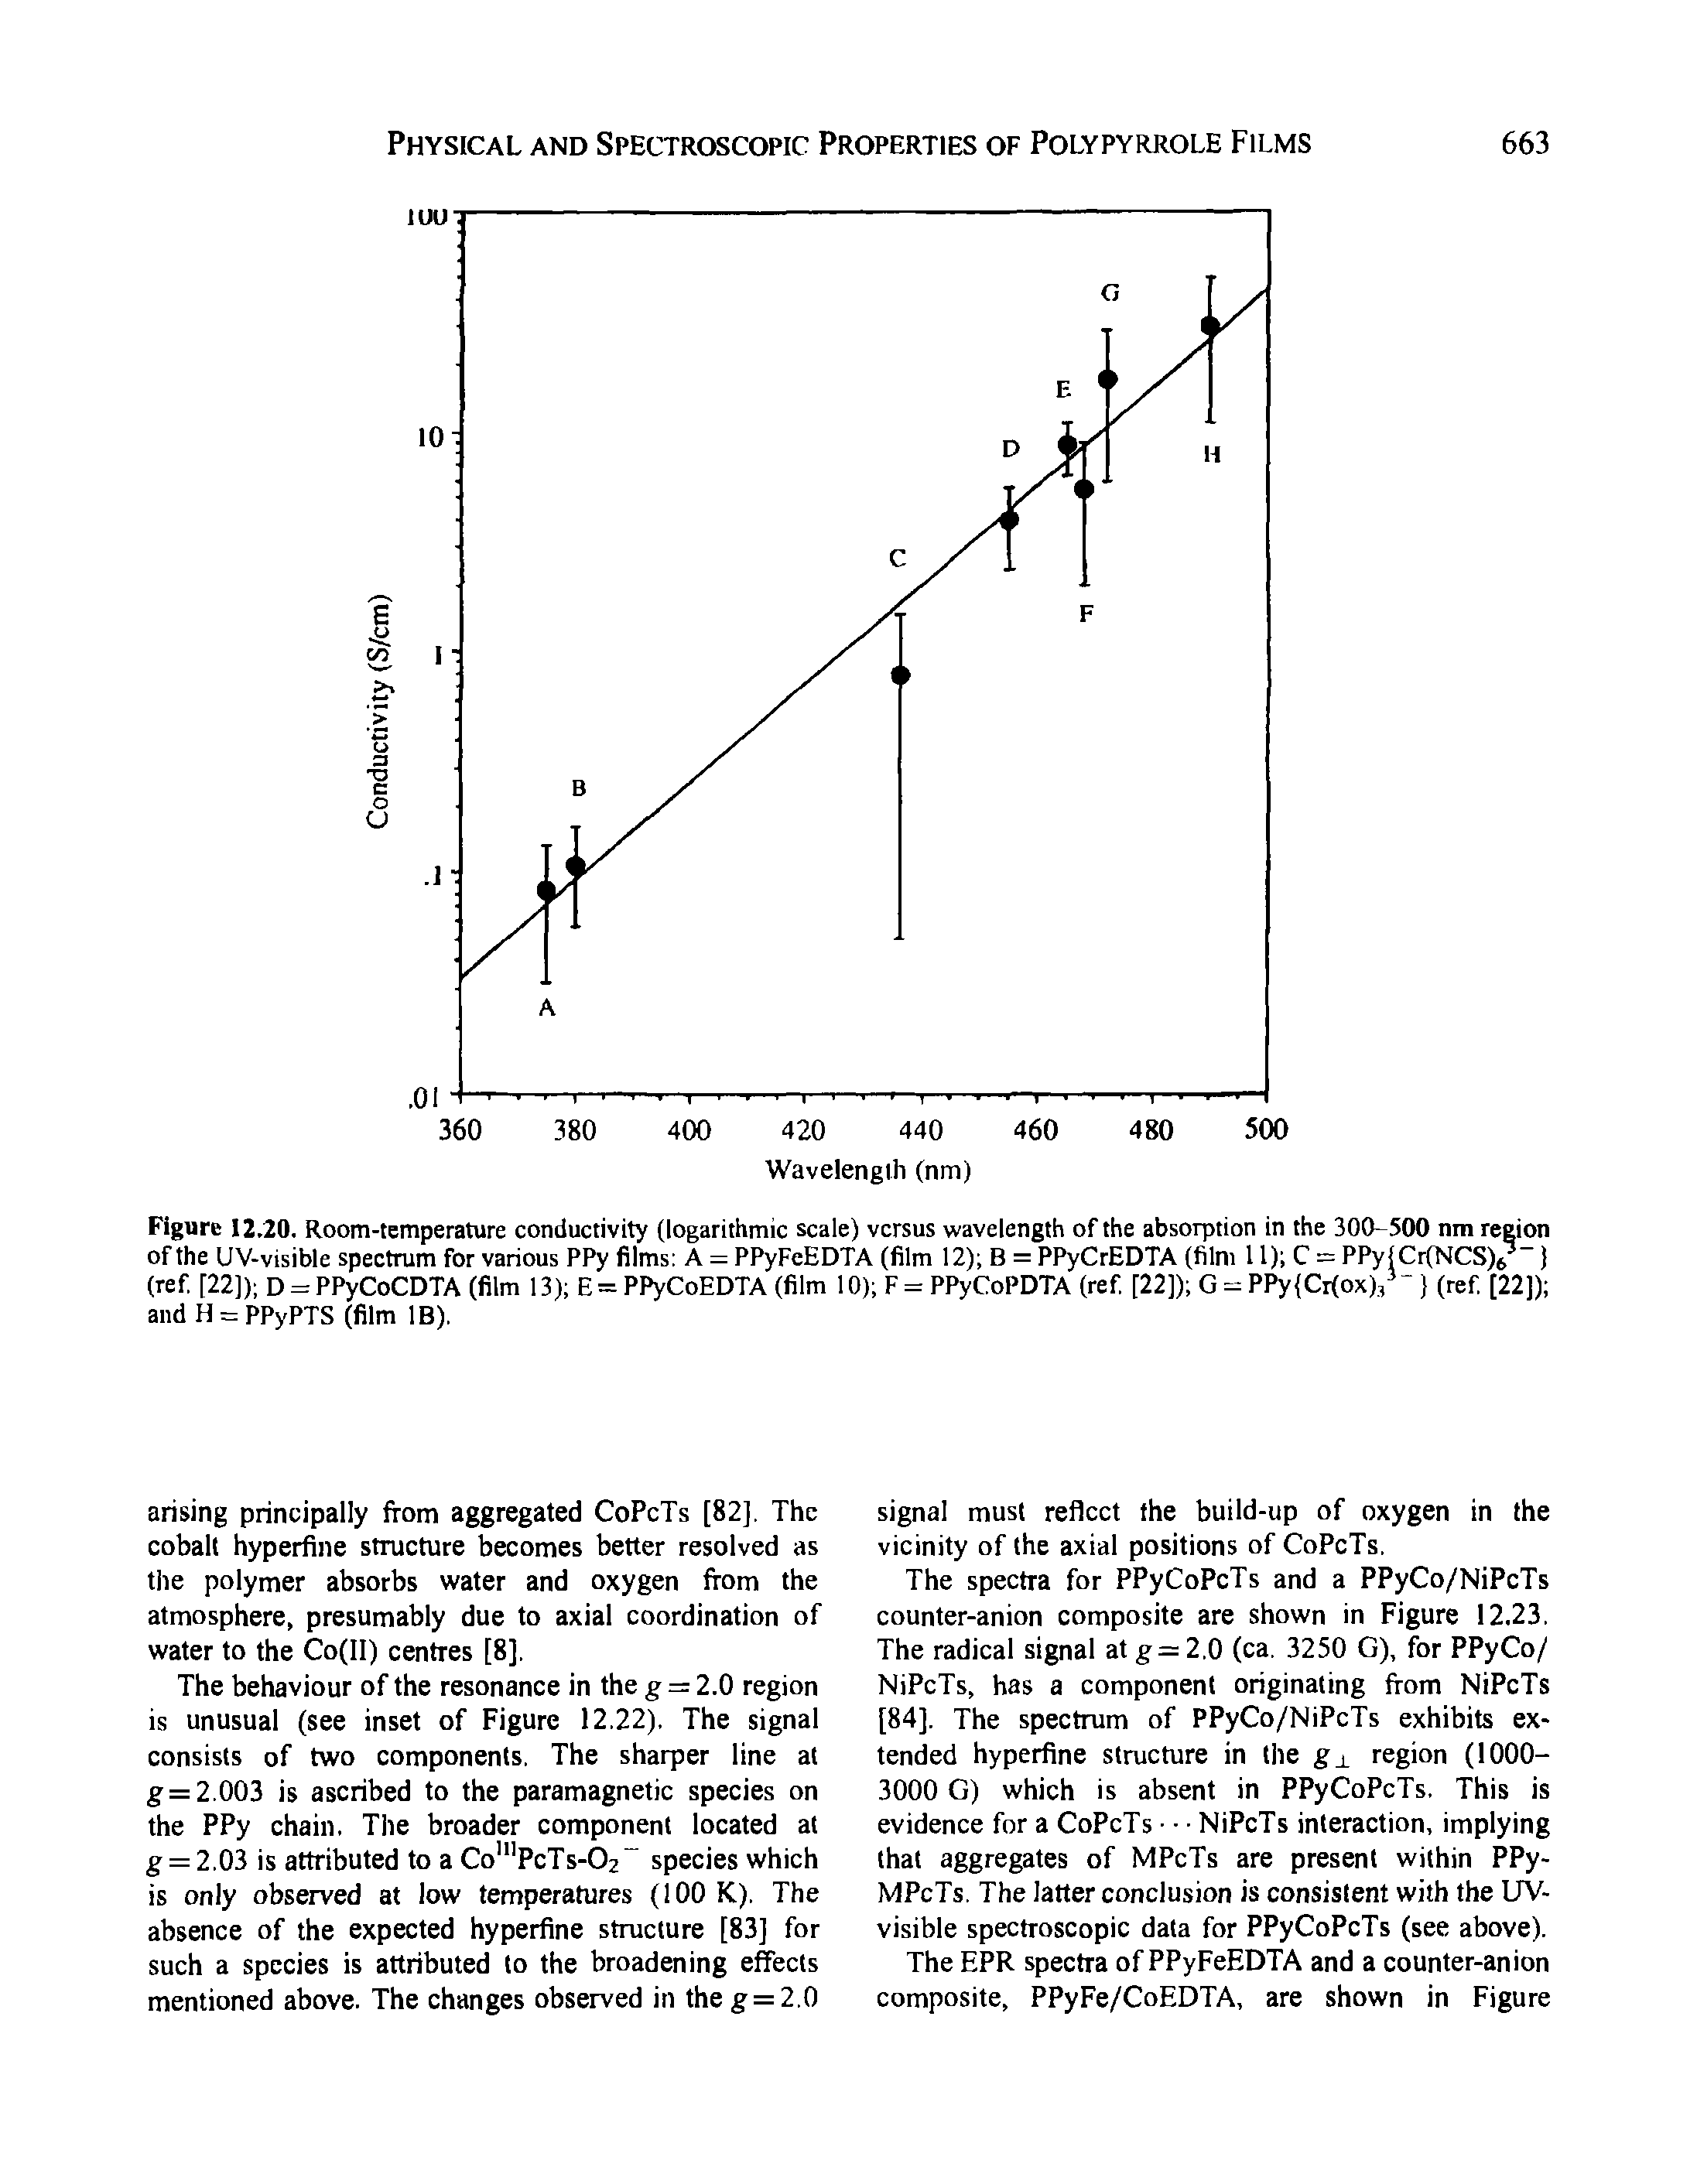 Figure 12.20. Room-temperature conductivity (logarithmic scale) versus wavelength of the absorption in the 300-500 nm region of the UV-visible spectrum for various PPy films A = PPyFeEDTA (film 12) B = PPyCrEDTA (film 11) C = PPy(Cr(NCS)t ) (ref [22]) D = PPyCoCDTA(film 13) E = PPyCoEDTA (film 10) F = PPyCoPDTA (ref [22]) G == PPy Ci(oxX/ (ref [22]) and H = PPyPTS (film IB).